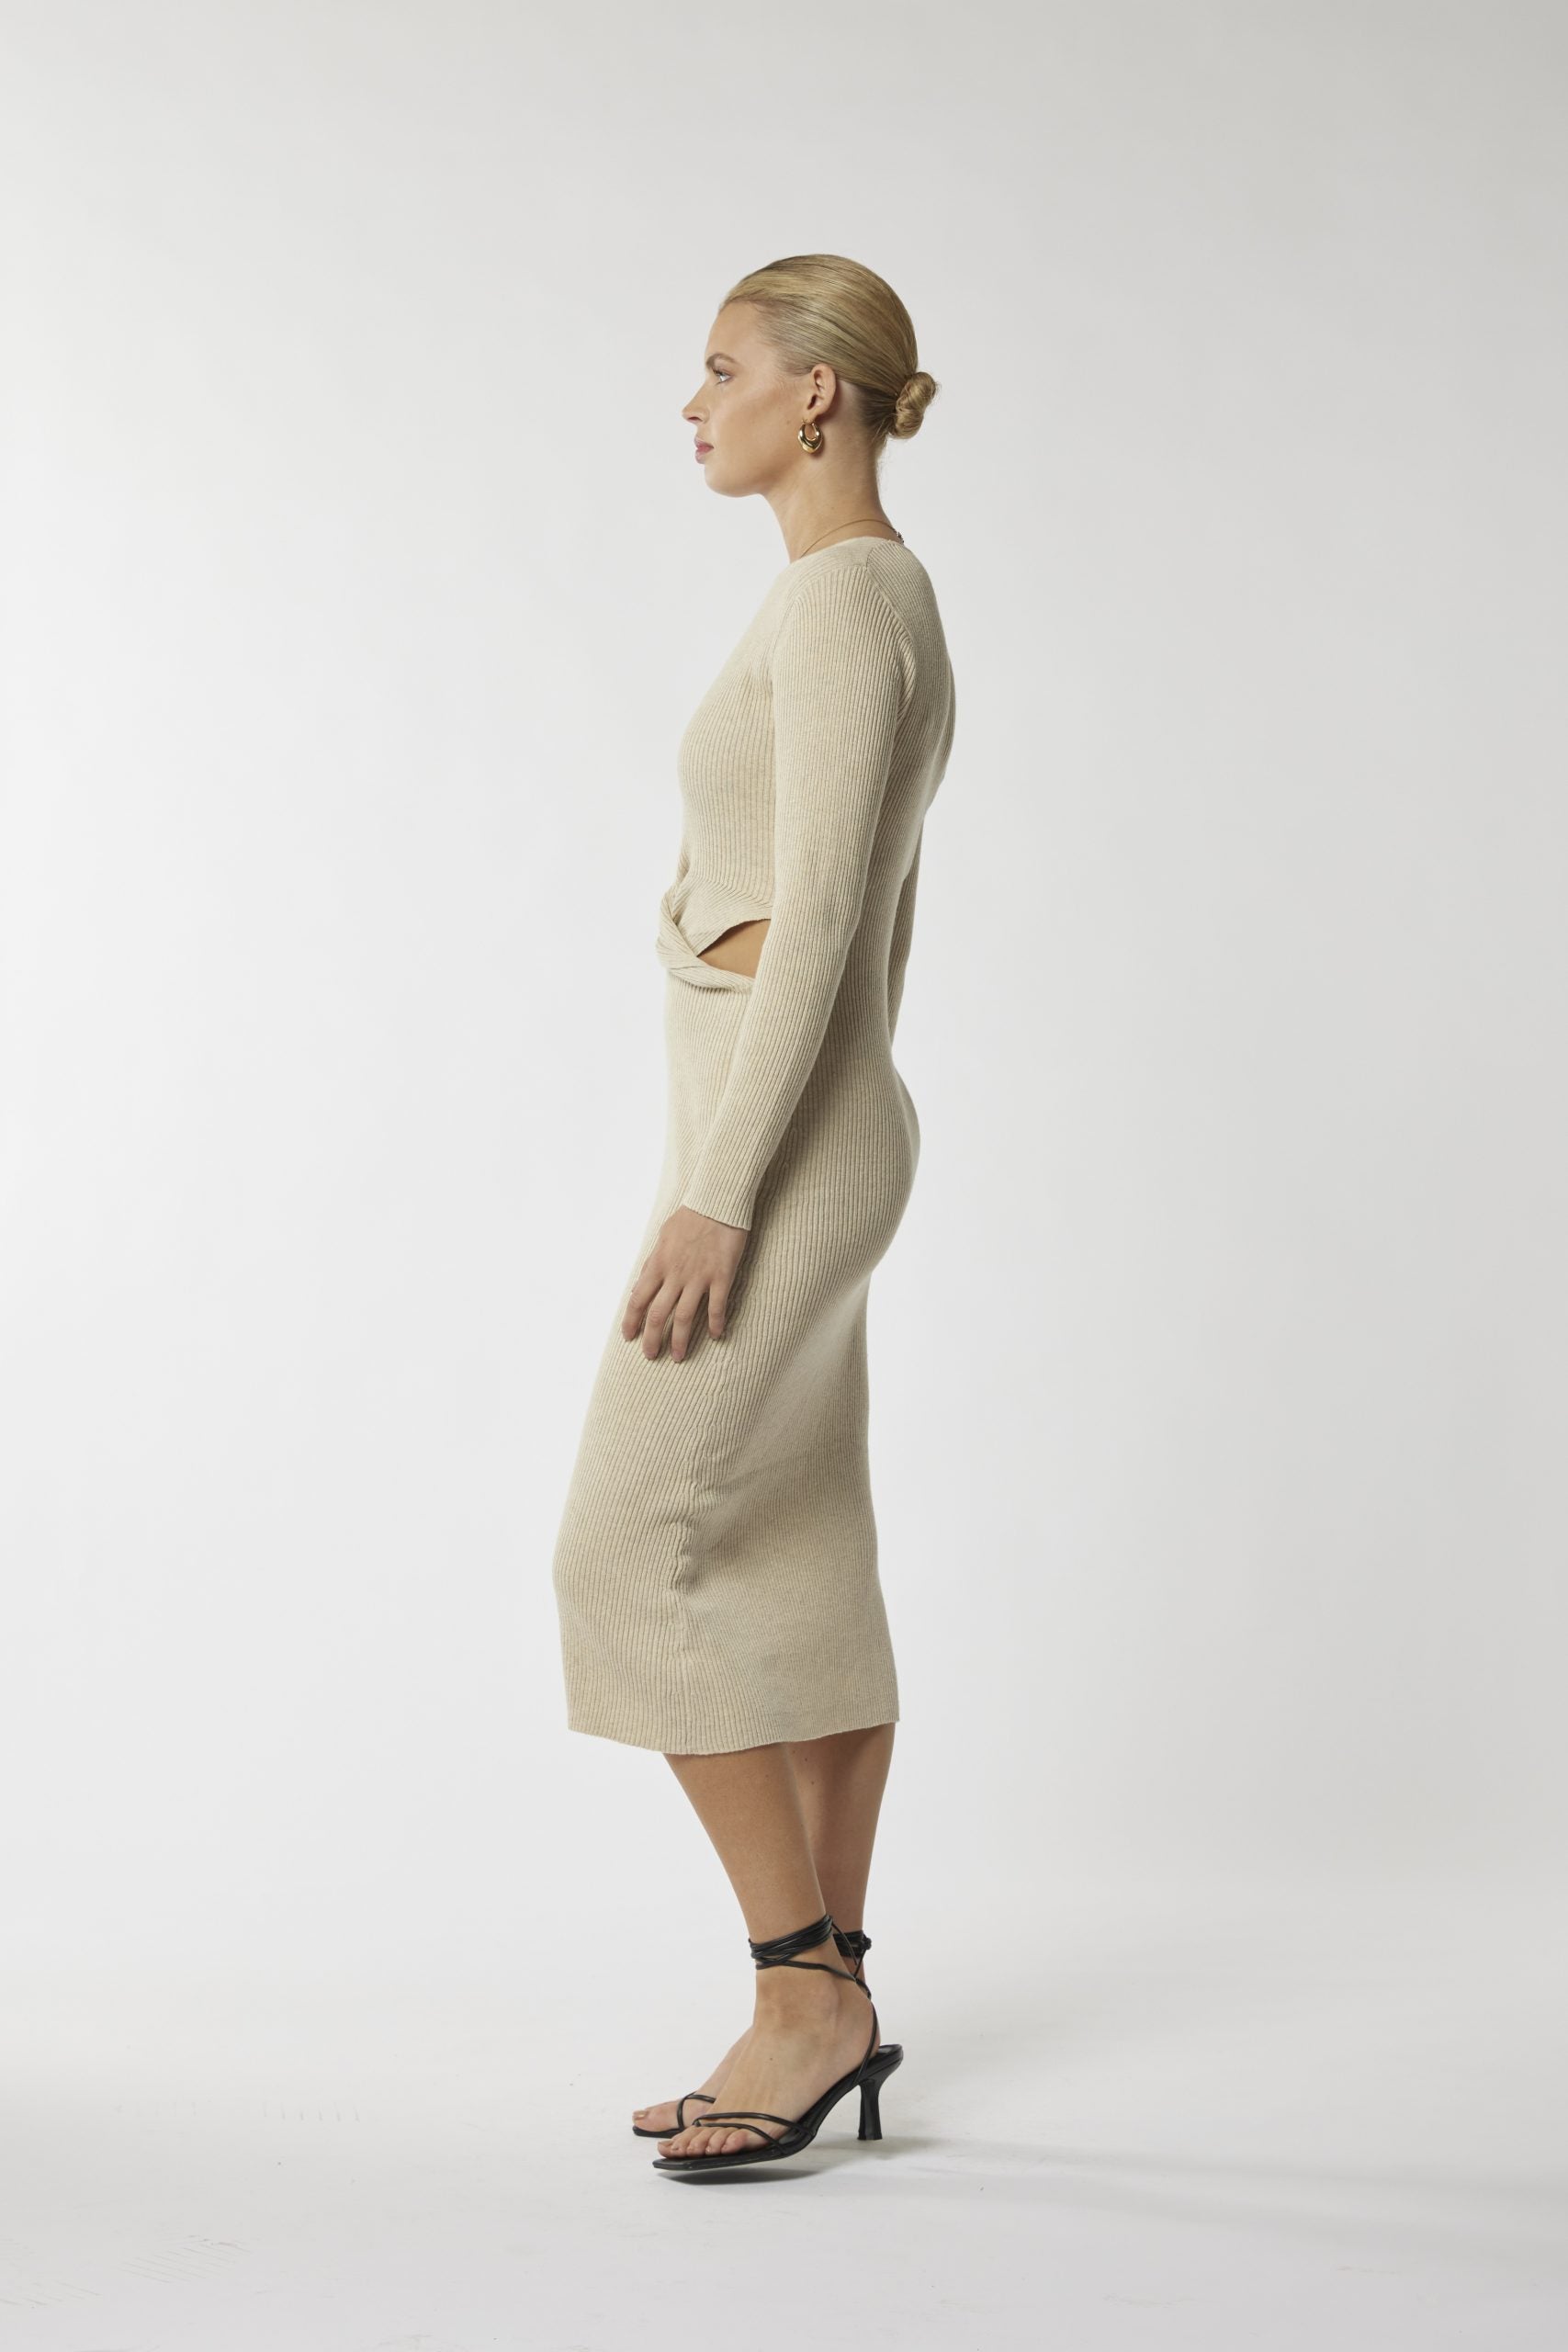 Effortless allure: Beige midi with waist cut-out. Shop the look today!